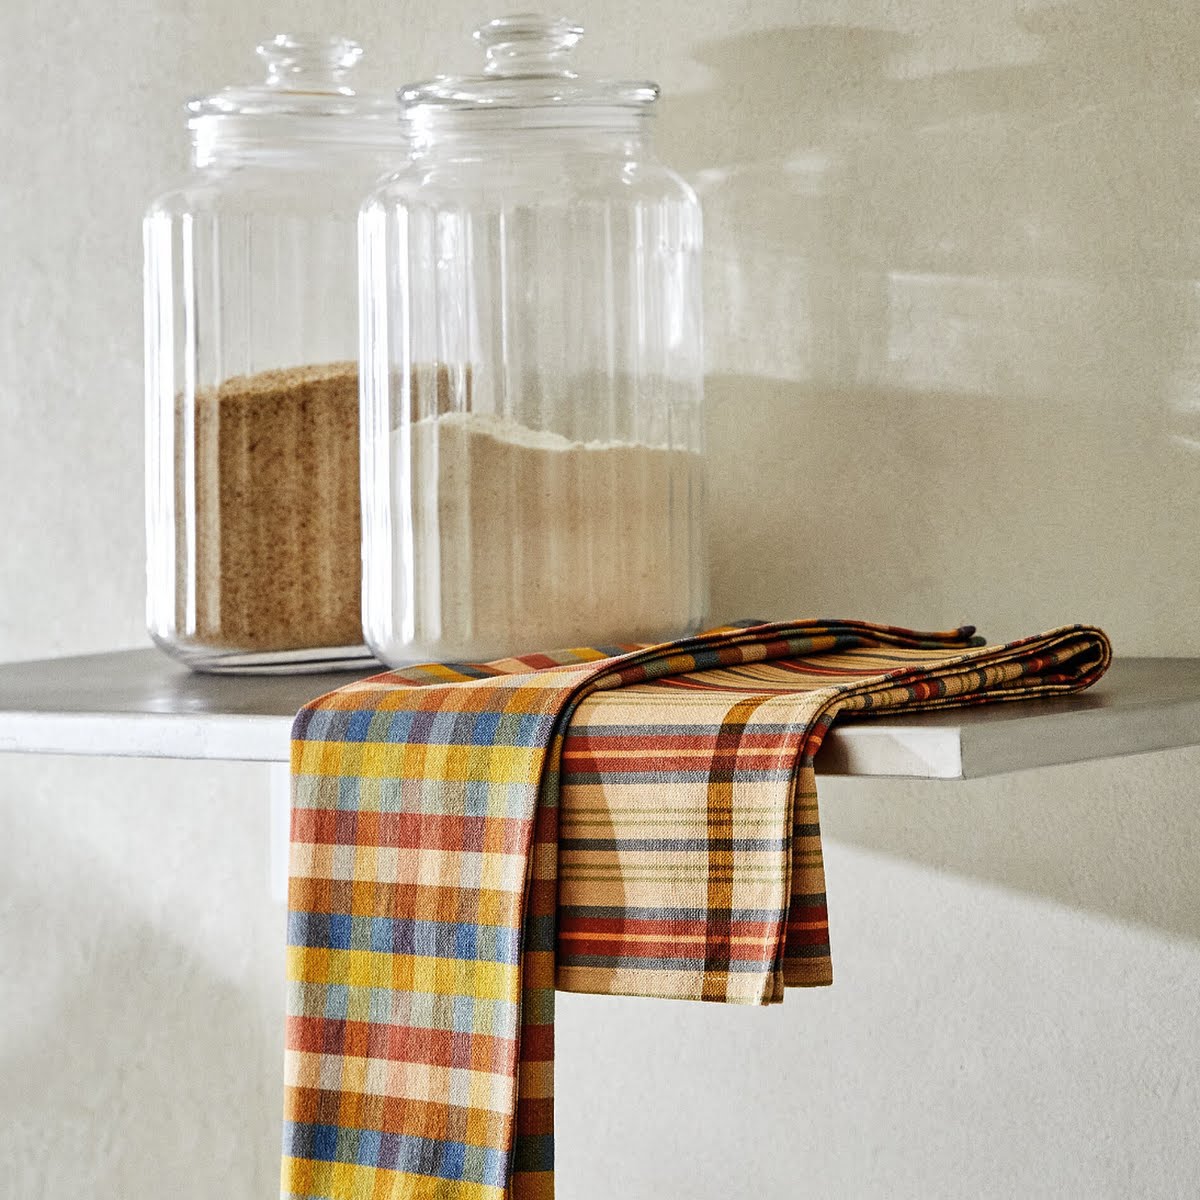 Pack of 2 checked tea towels, €12.99, Zara Home